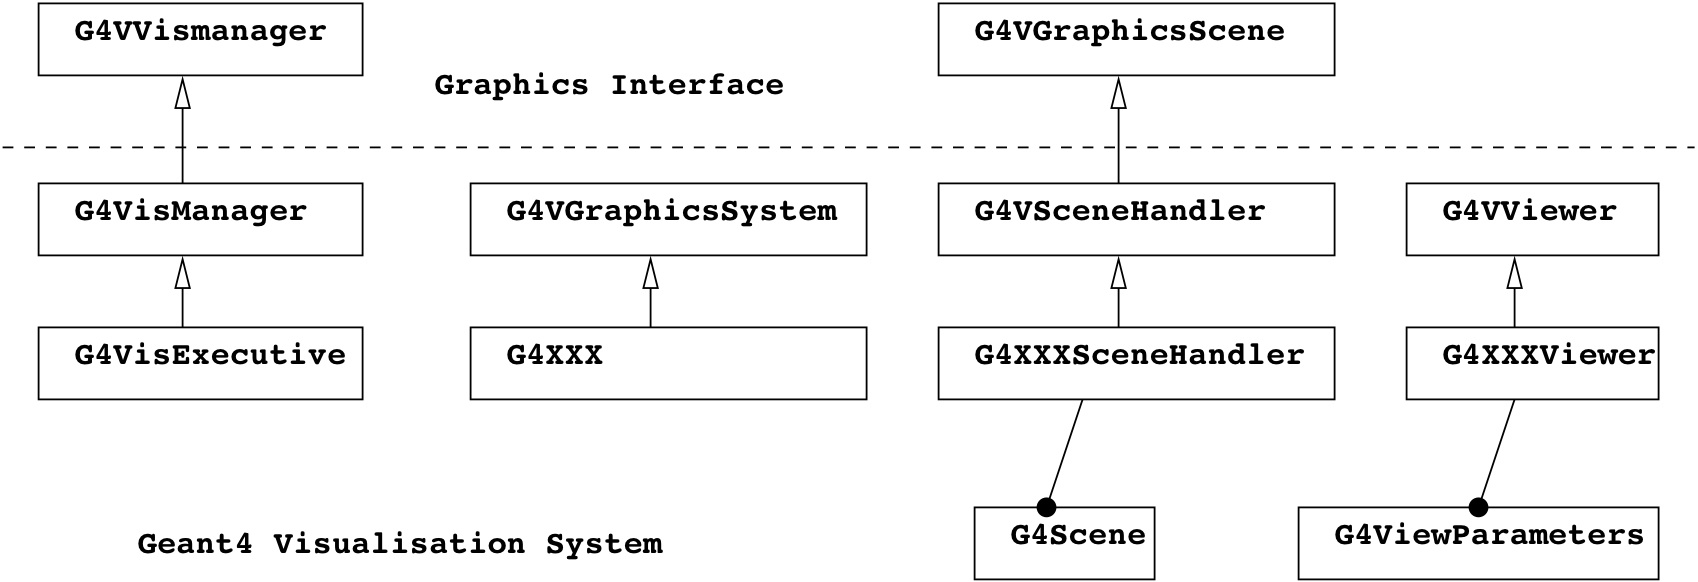 Geant Visualisation System Class Diagram